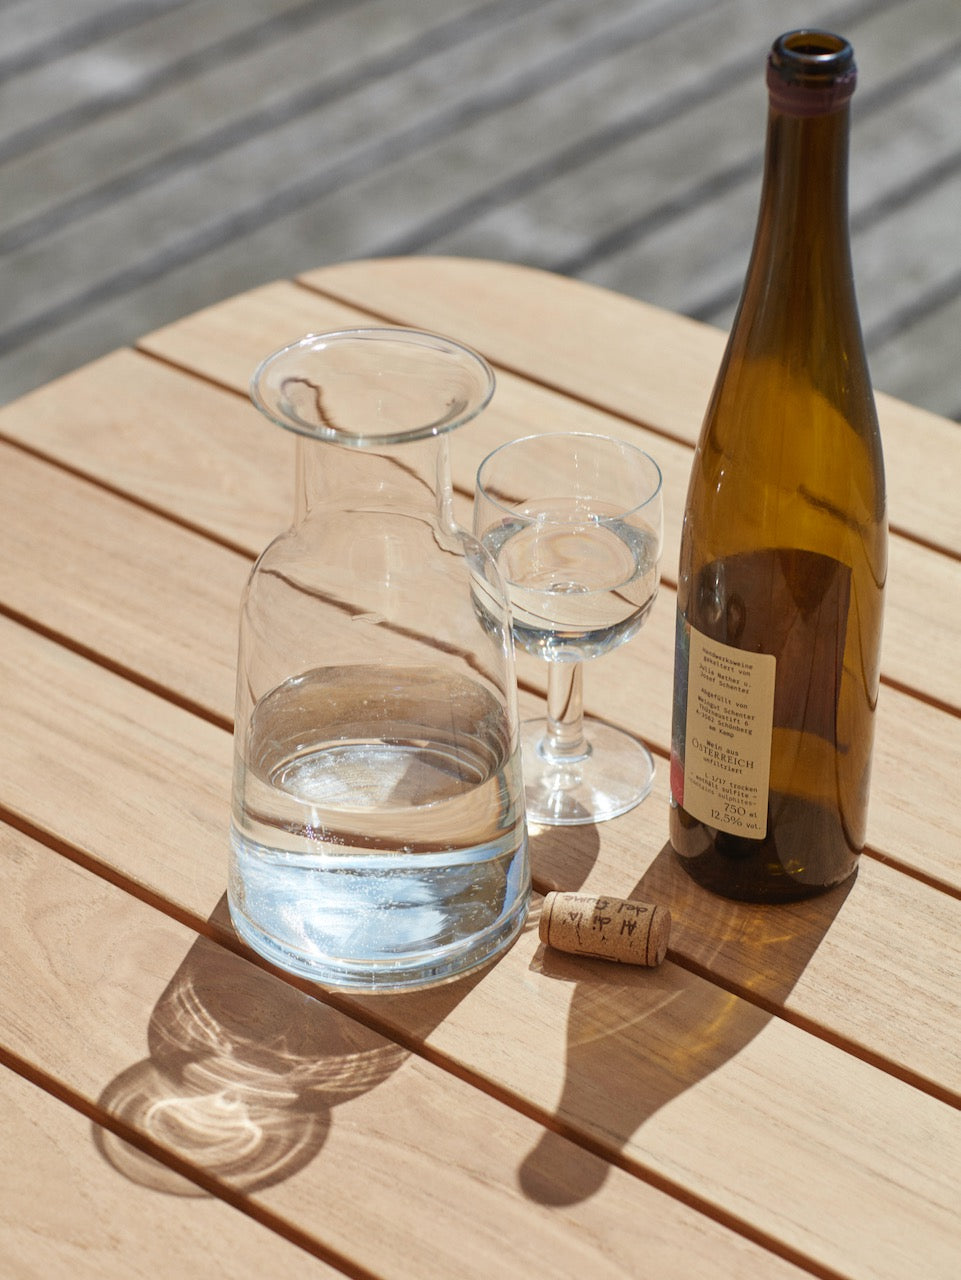 A Hammer Decanter by Skagerak and a glass of water on a wooden table.